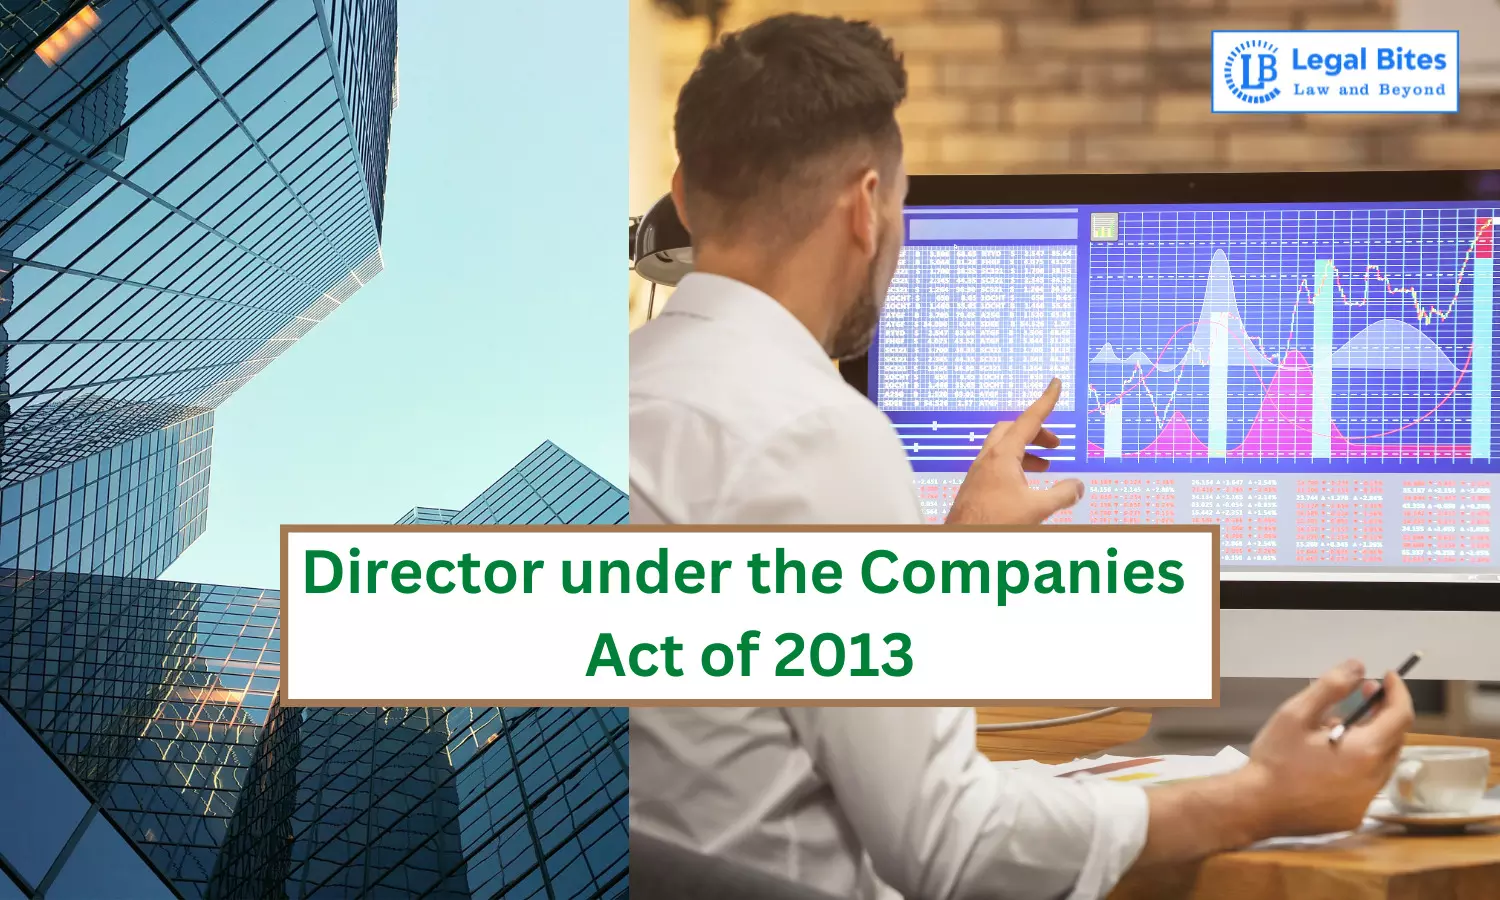 All about a Company Director under the Companies Act, 2013